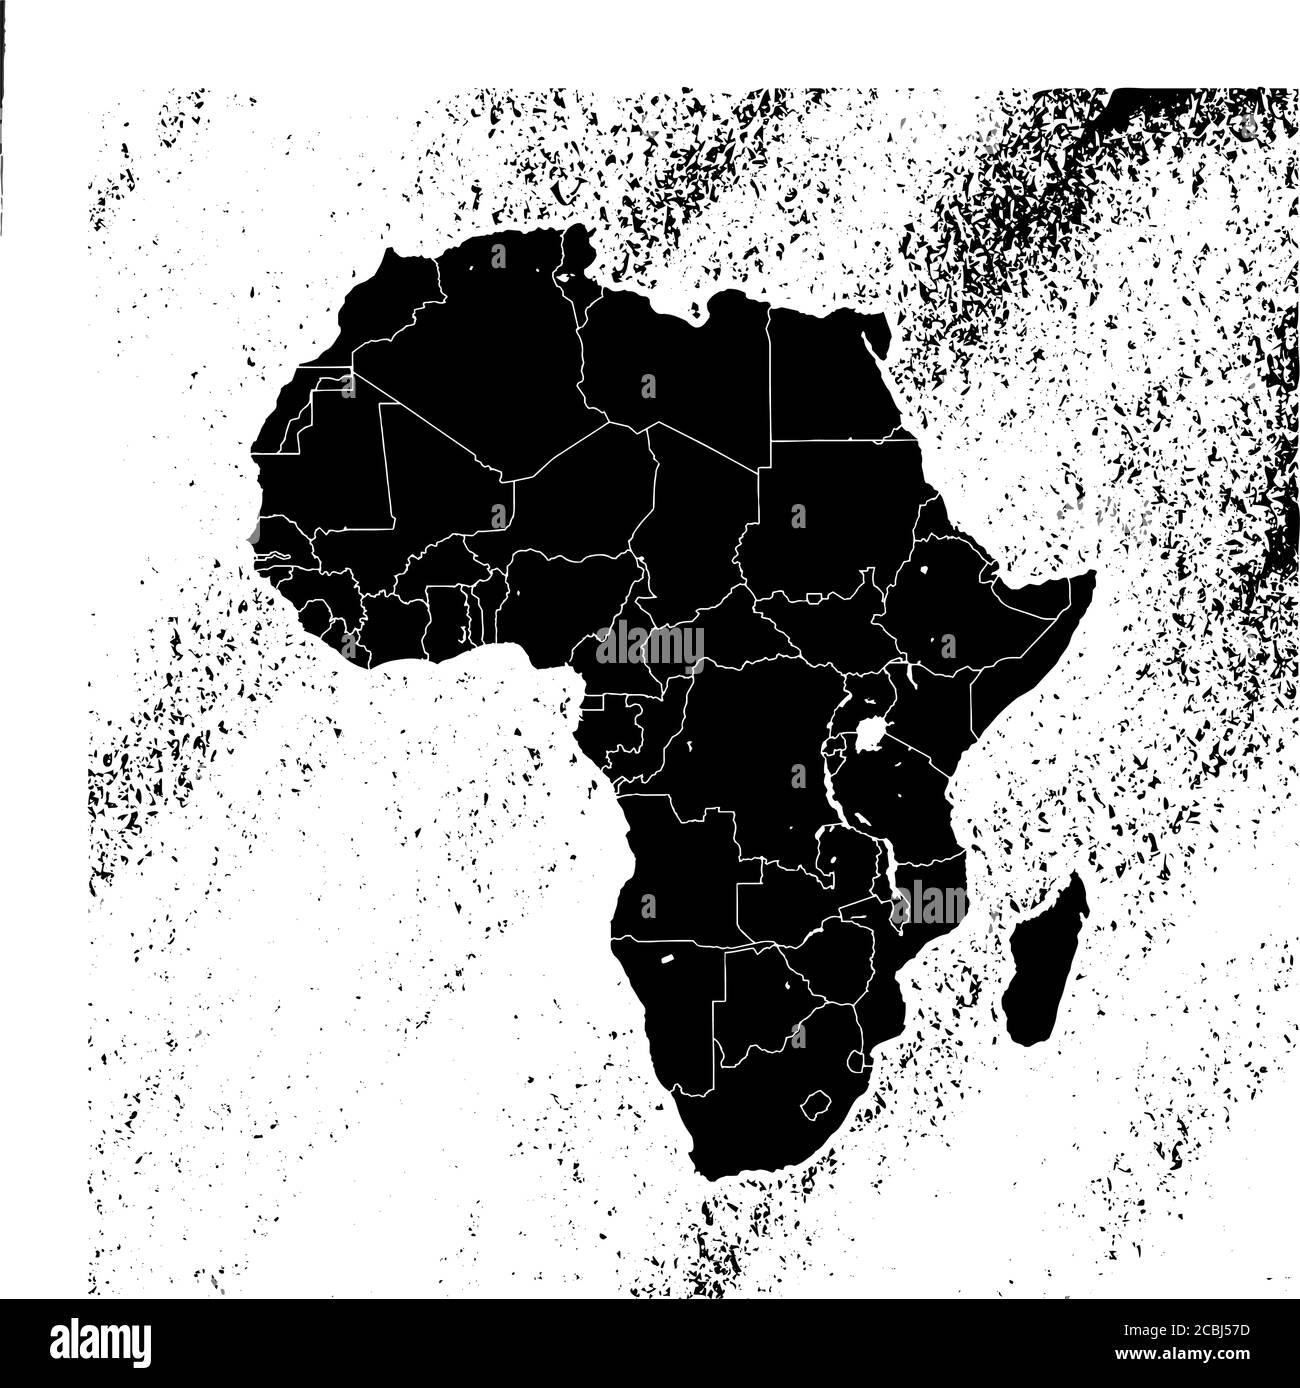 Africa map on vintage background. Black and white hand drawn illustration. Icon sign for print and labelling. Stock Vector